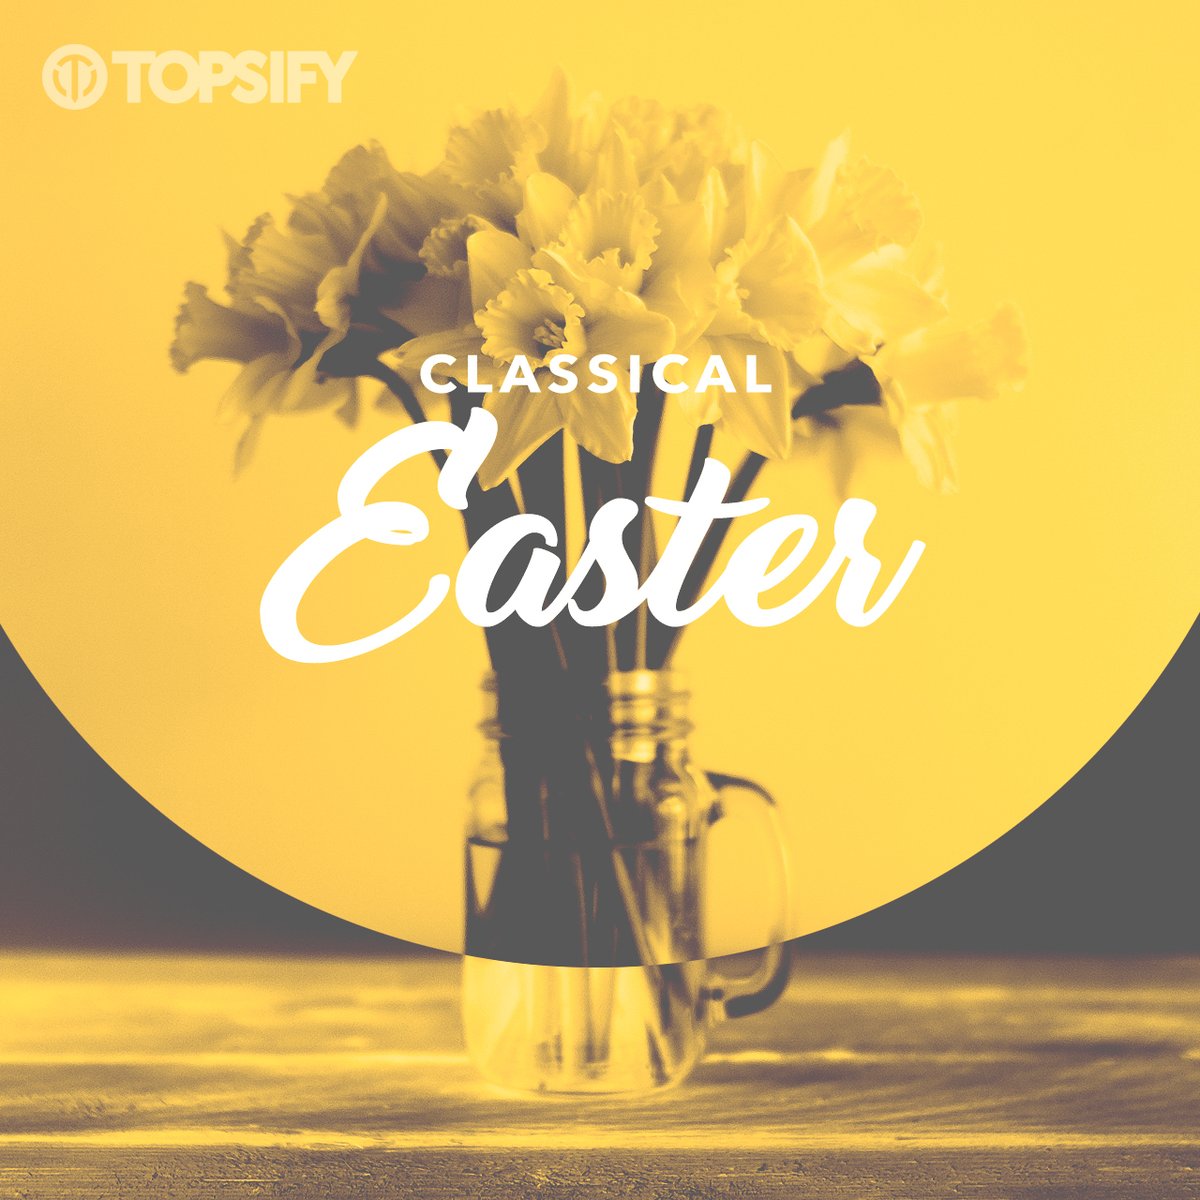 To mark Easter, we've created a playlist for reflection and renewal spanning choral, vocal and instrumental music by Bach, Vivaldi, Telemann and Dowland, including recordings made by Andrew Parrott, @EPahud, @FretworkViols, and @TheSixteen 🎧 meet.lnk.to/easterTW